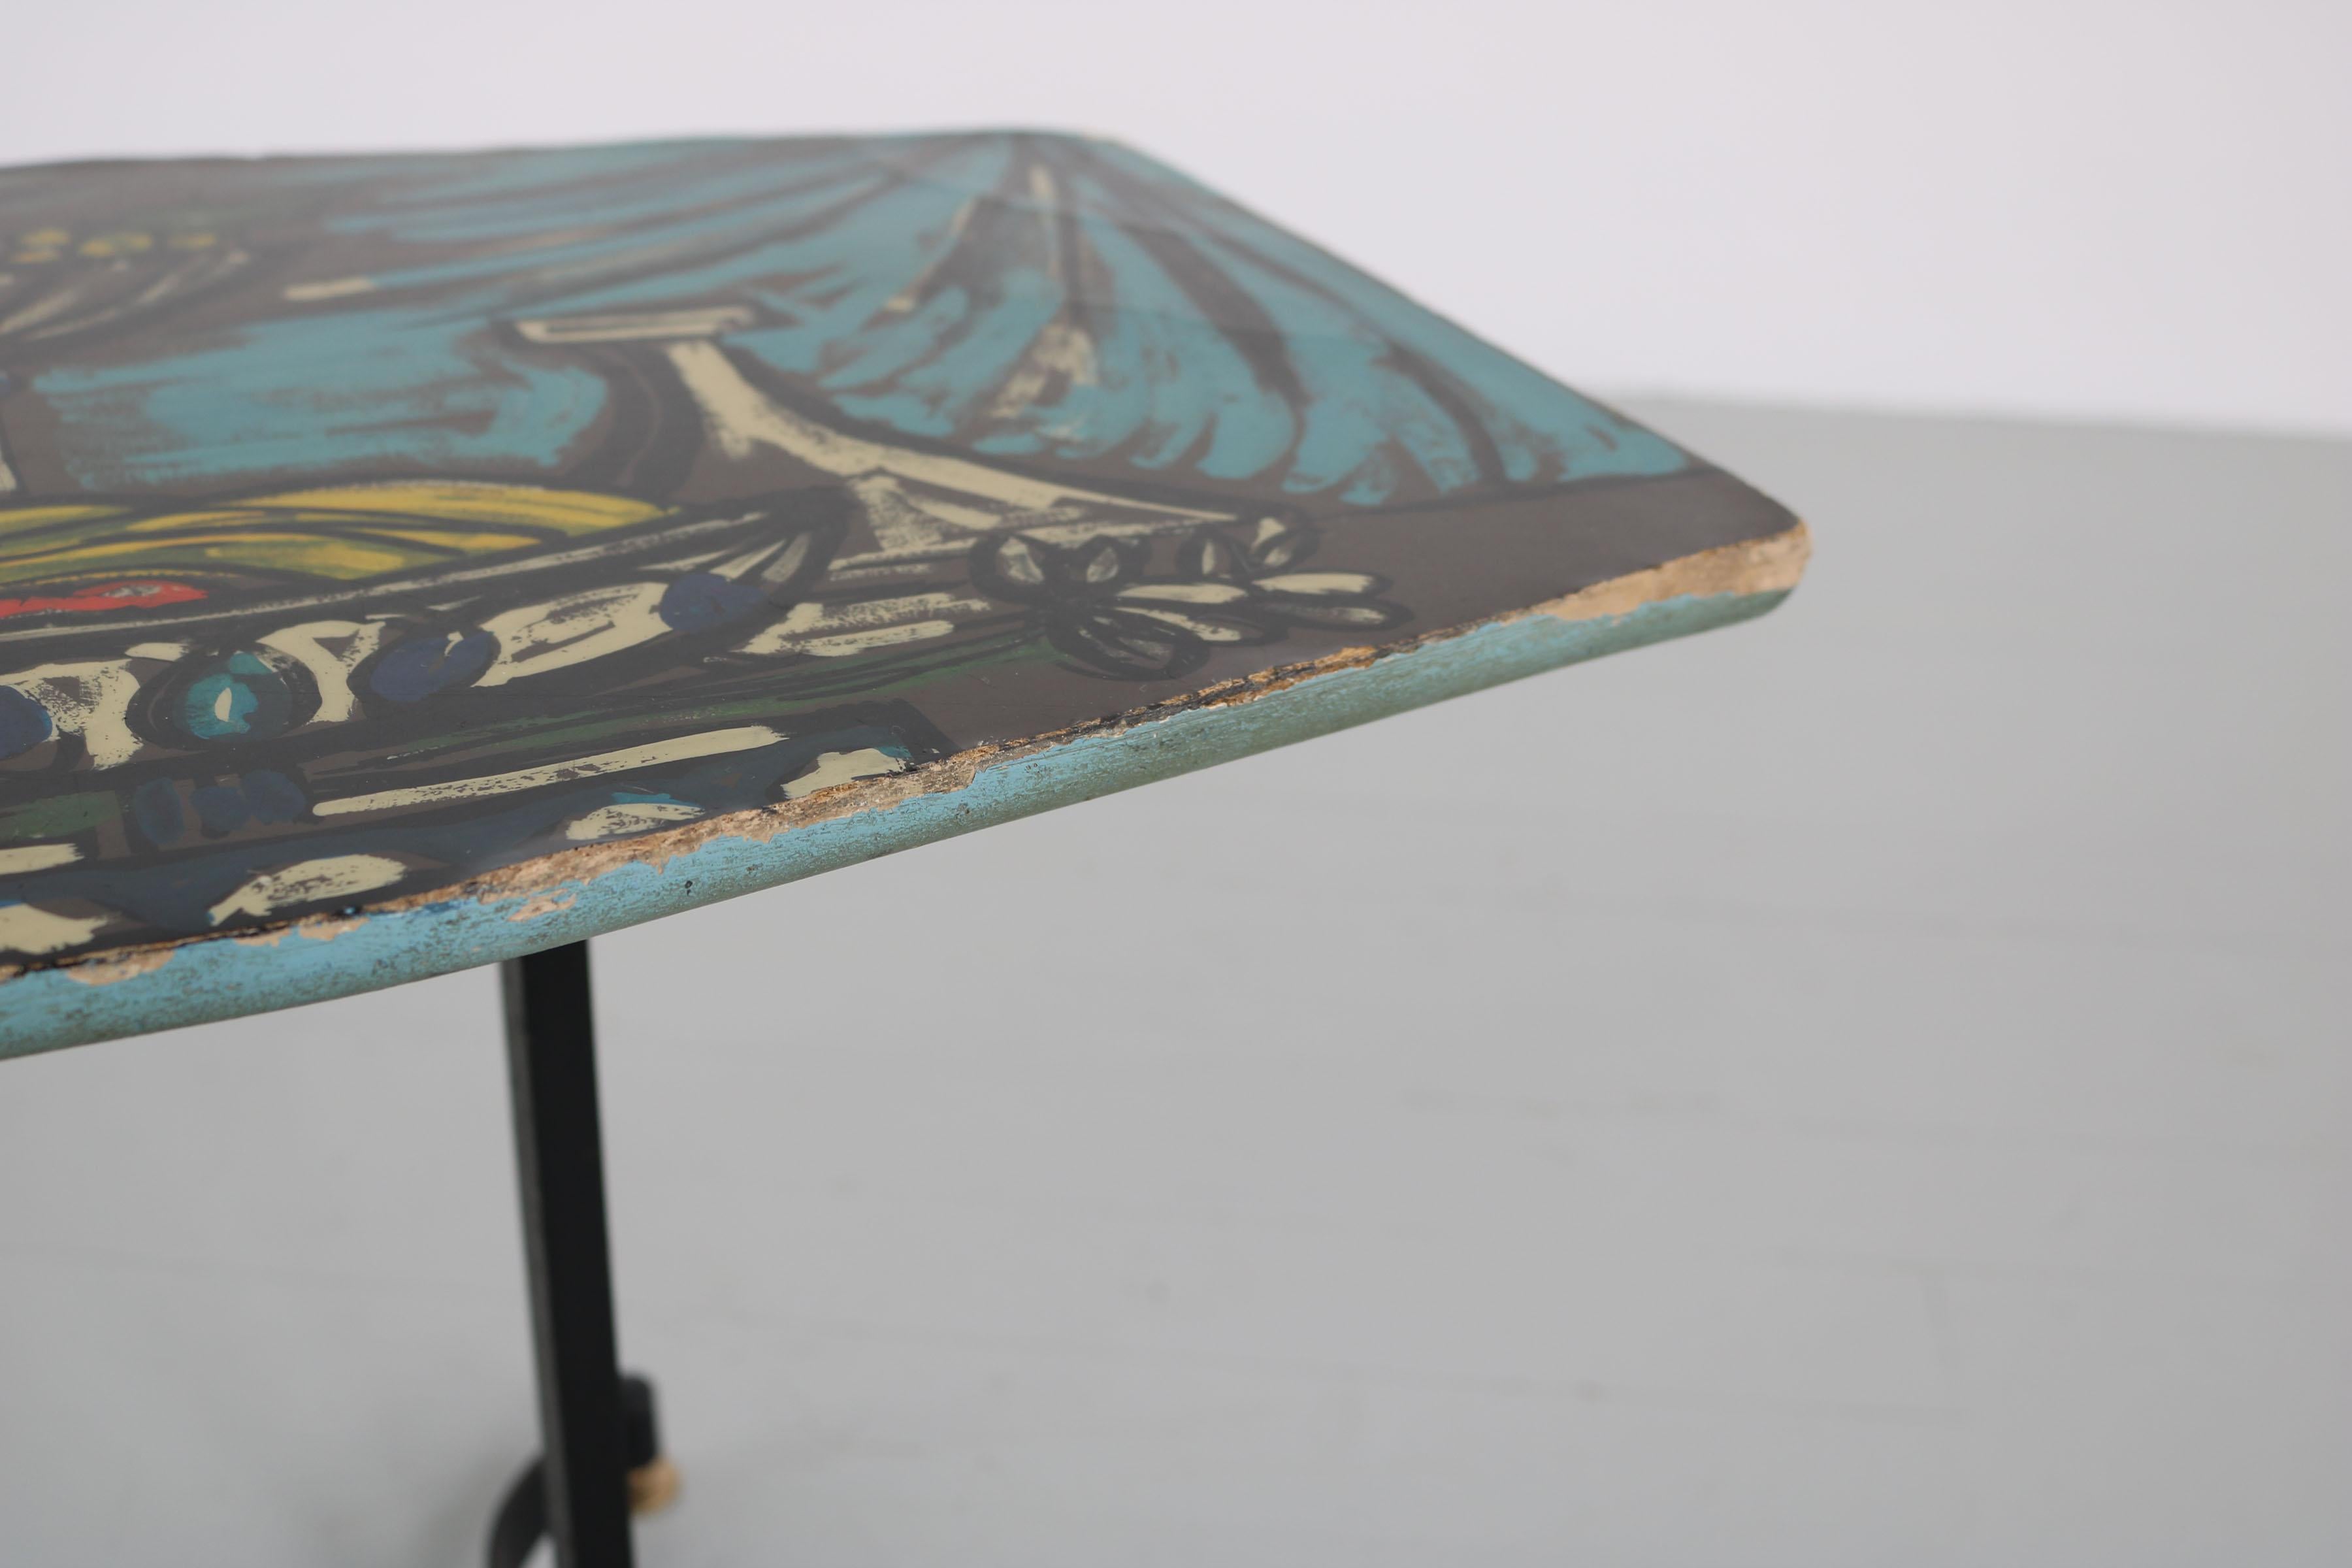 Italian Dark Sofa Table with Colorful Hand-Painted Motives on Table Top, 1950s For Sale 3